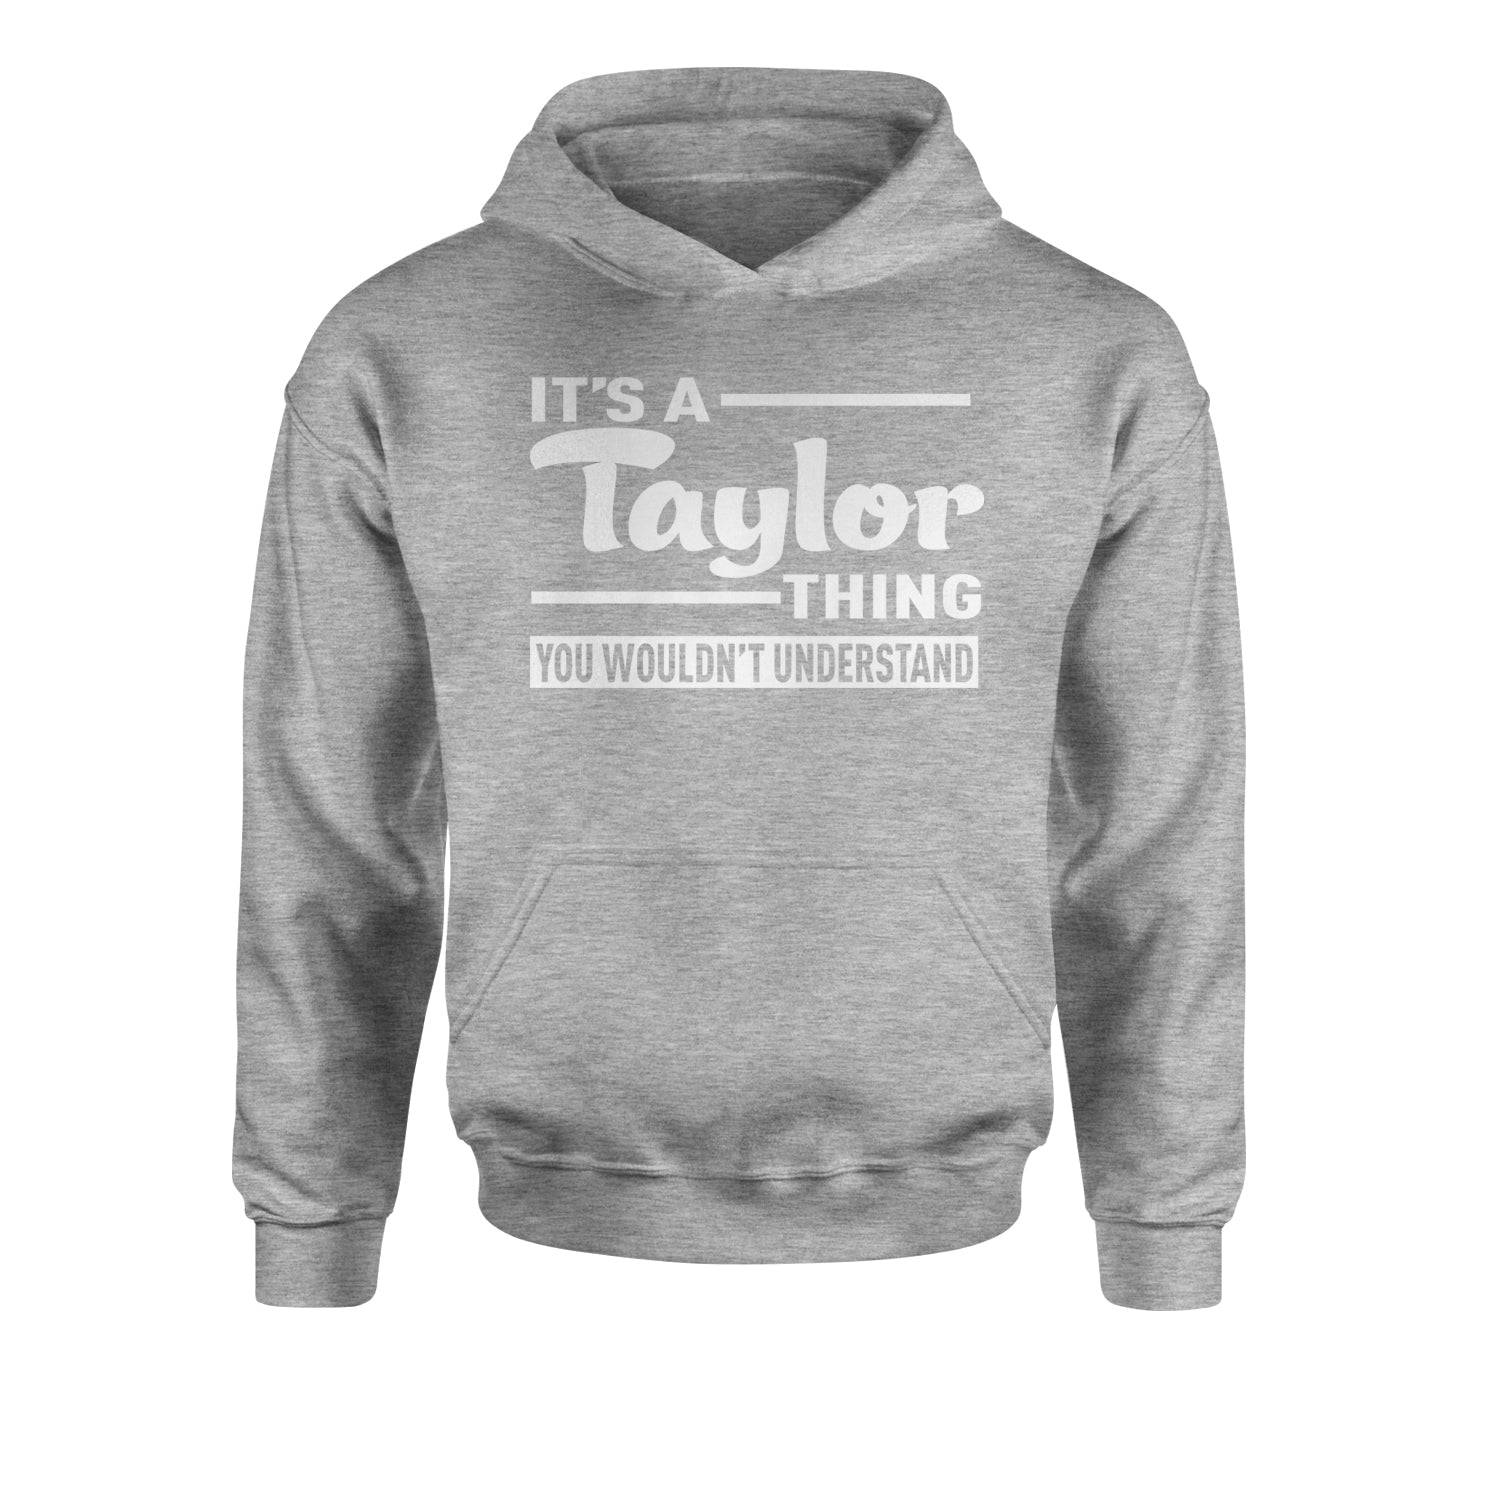 It's A Taylor Thing, You Wouldn't Understand Youth-Sized Hoodie nation, taylornation by Expression Tees